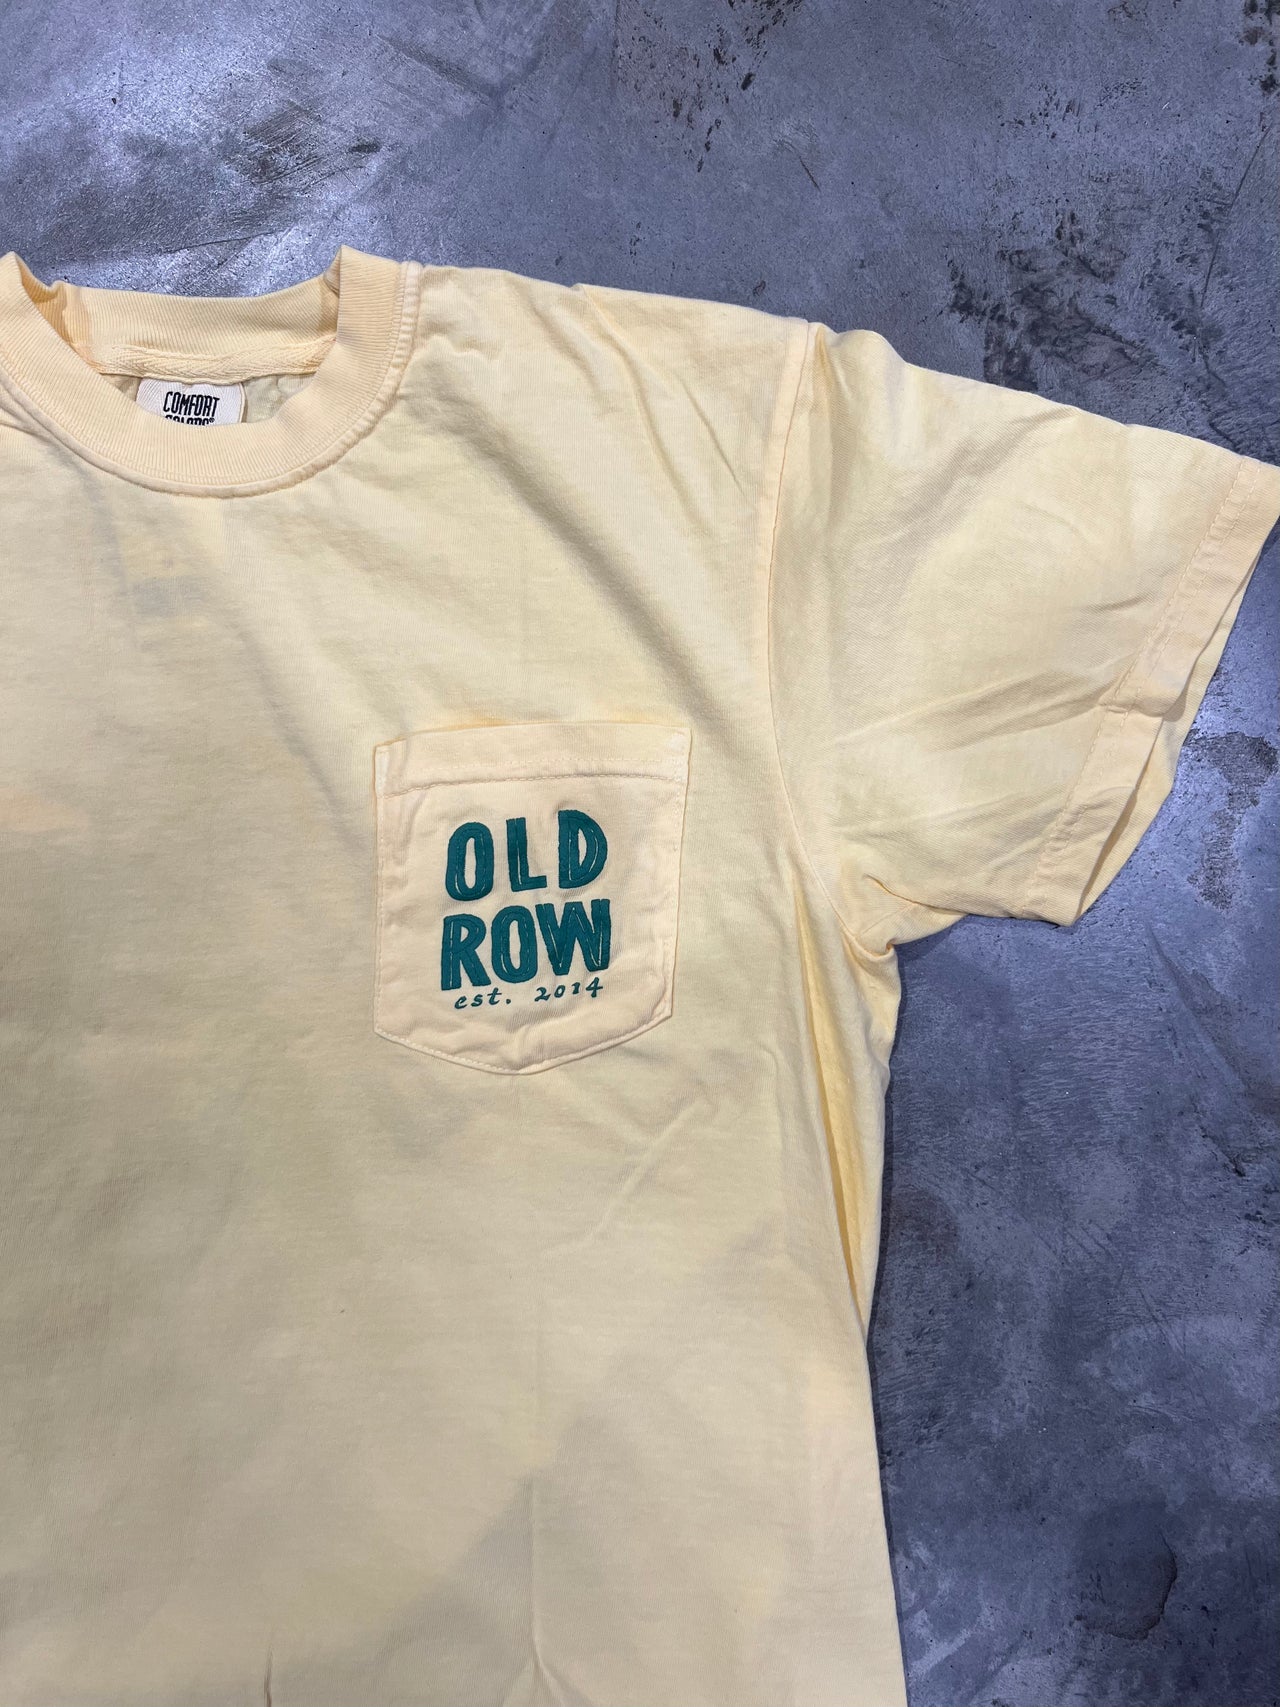 Old Row Golf Cart Optional Short Sleeve T-Shirt. Man drinking on the golf course.